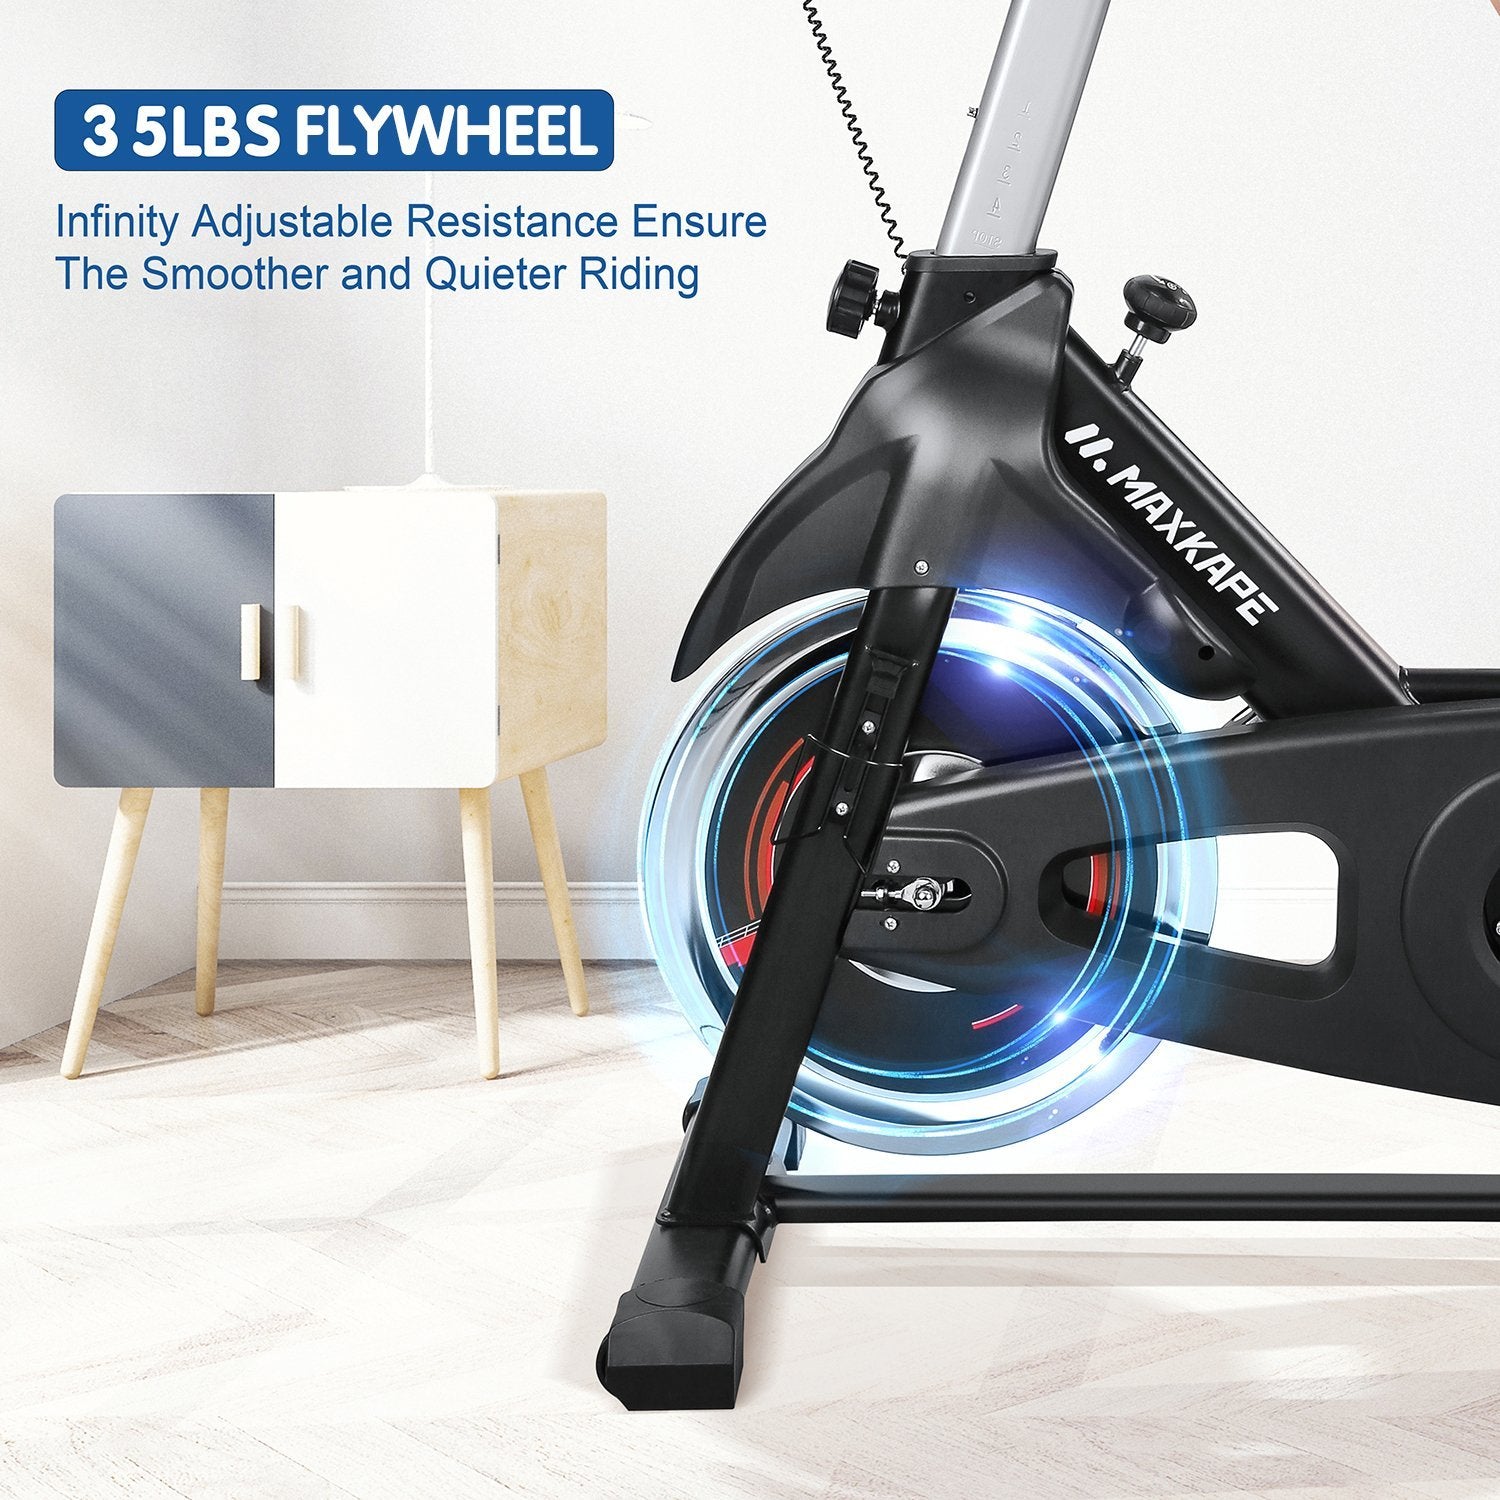 Load image into Gallery viewer, MaxKare Exercise Bike Stationary Indoor Cycling Bike with 35 LBS Flywheel Display Panel Belt Drive for Home Cardio Workout - NAIPO
